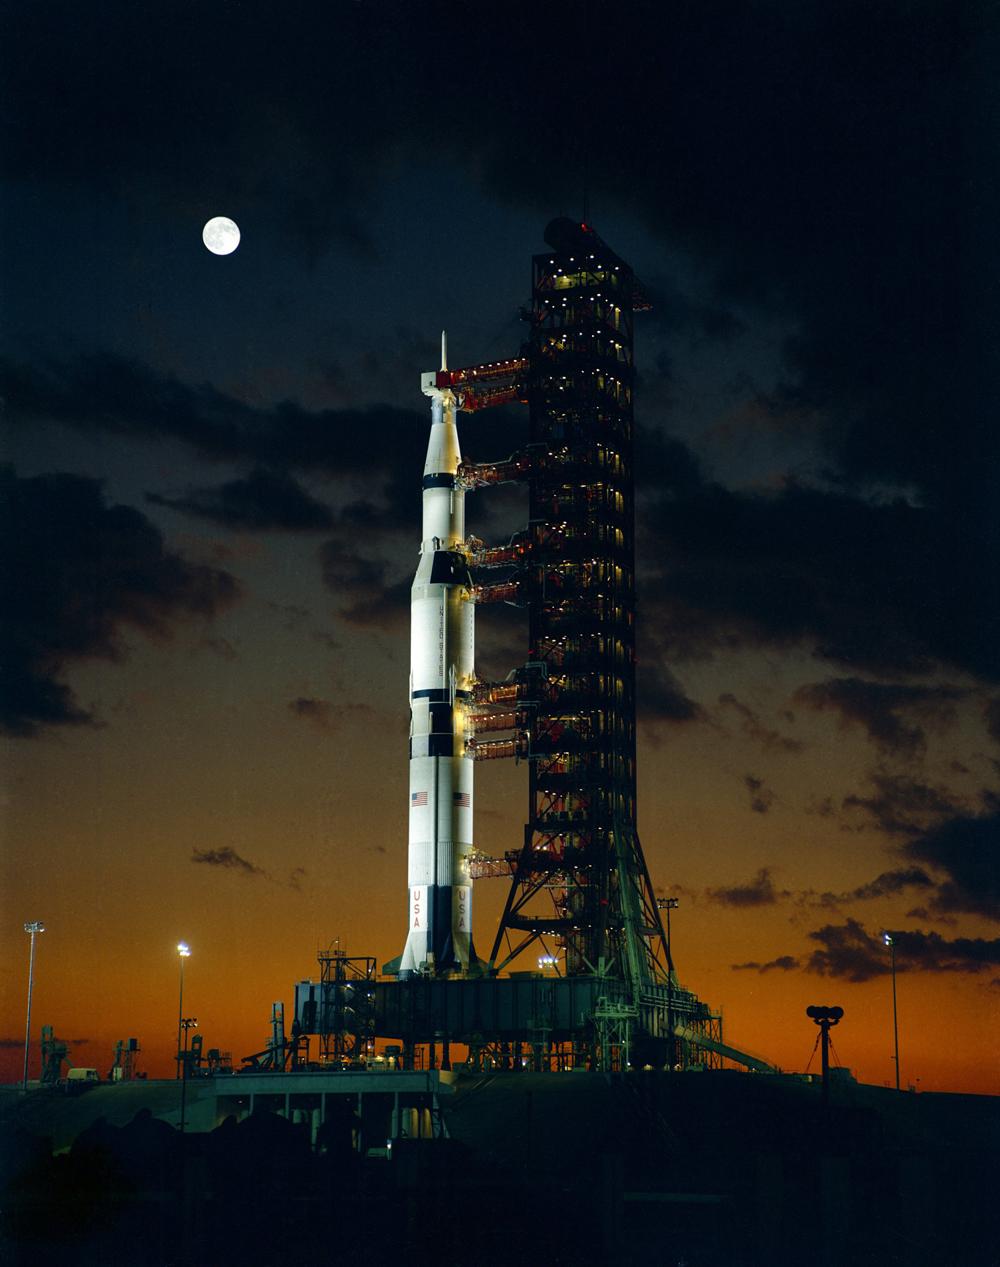 Surprising Facts About NASA's Mighty Saturn V Moon Rocket